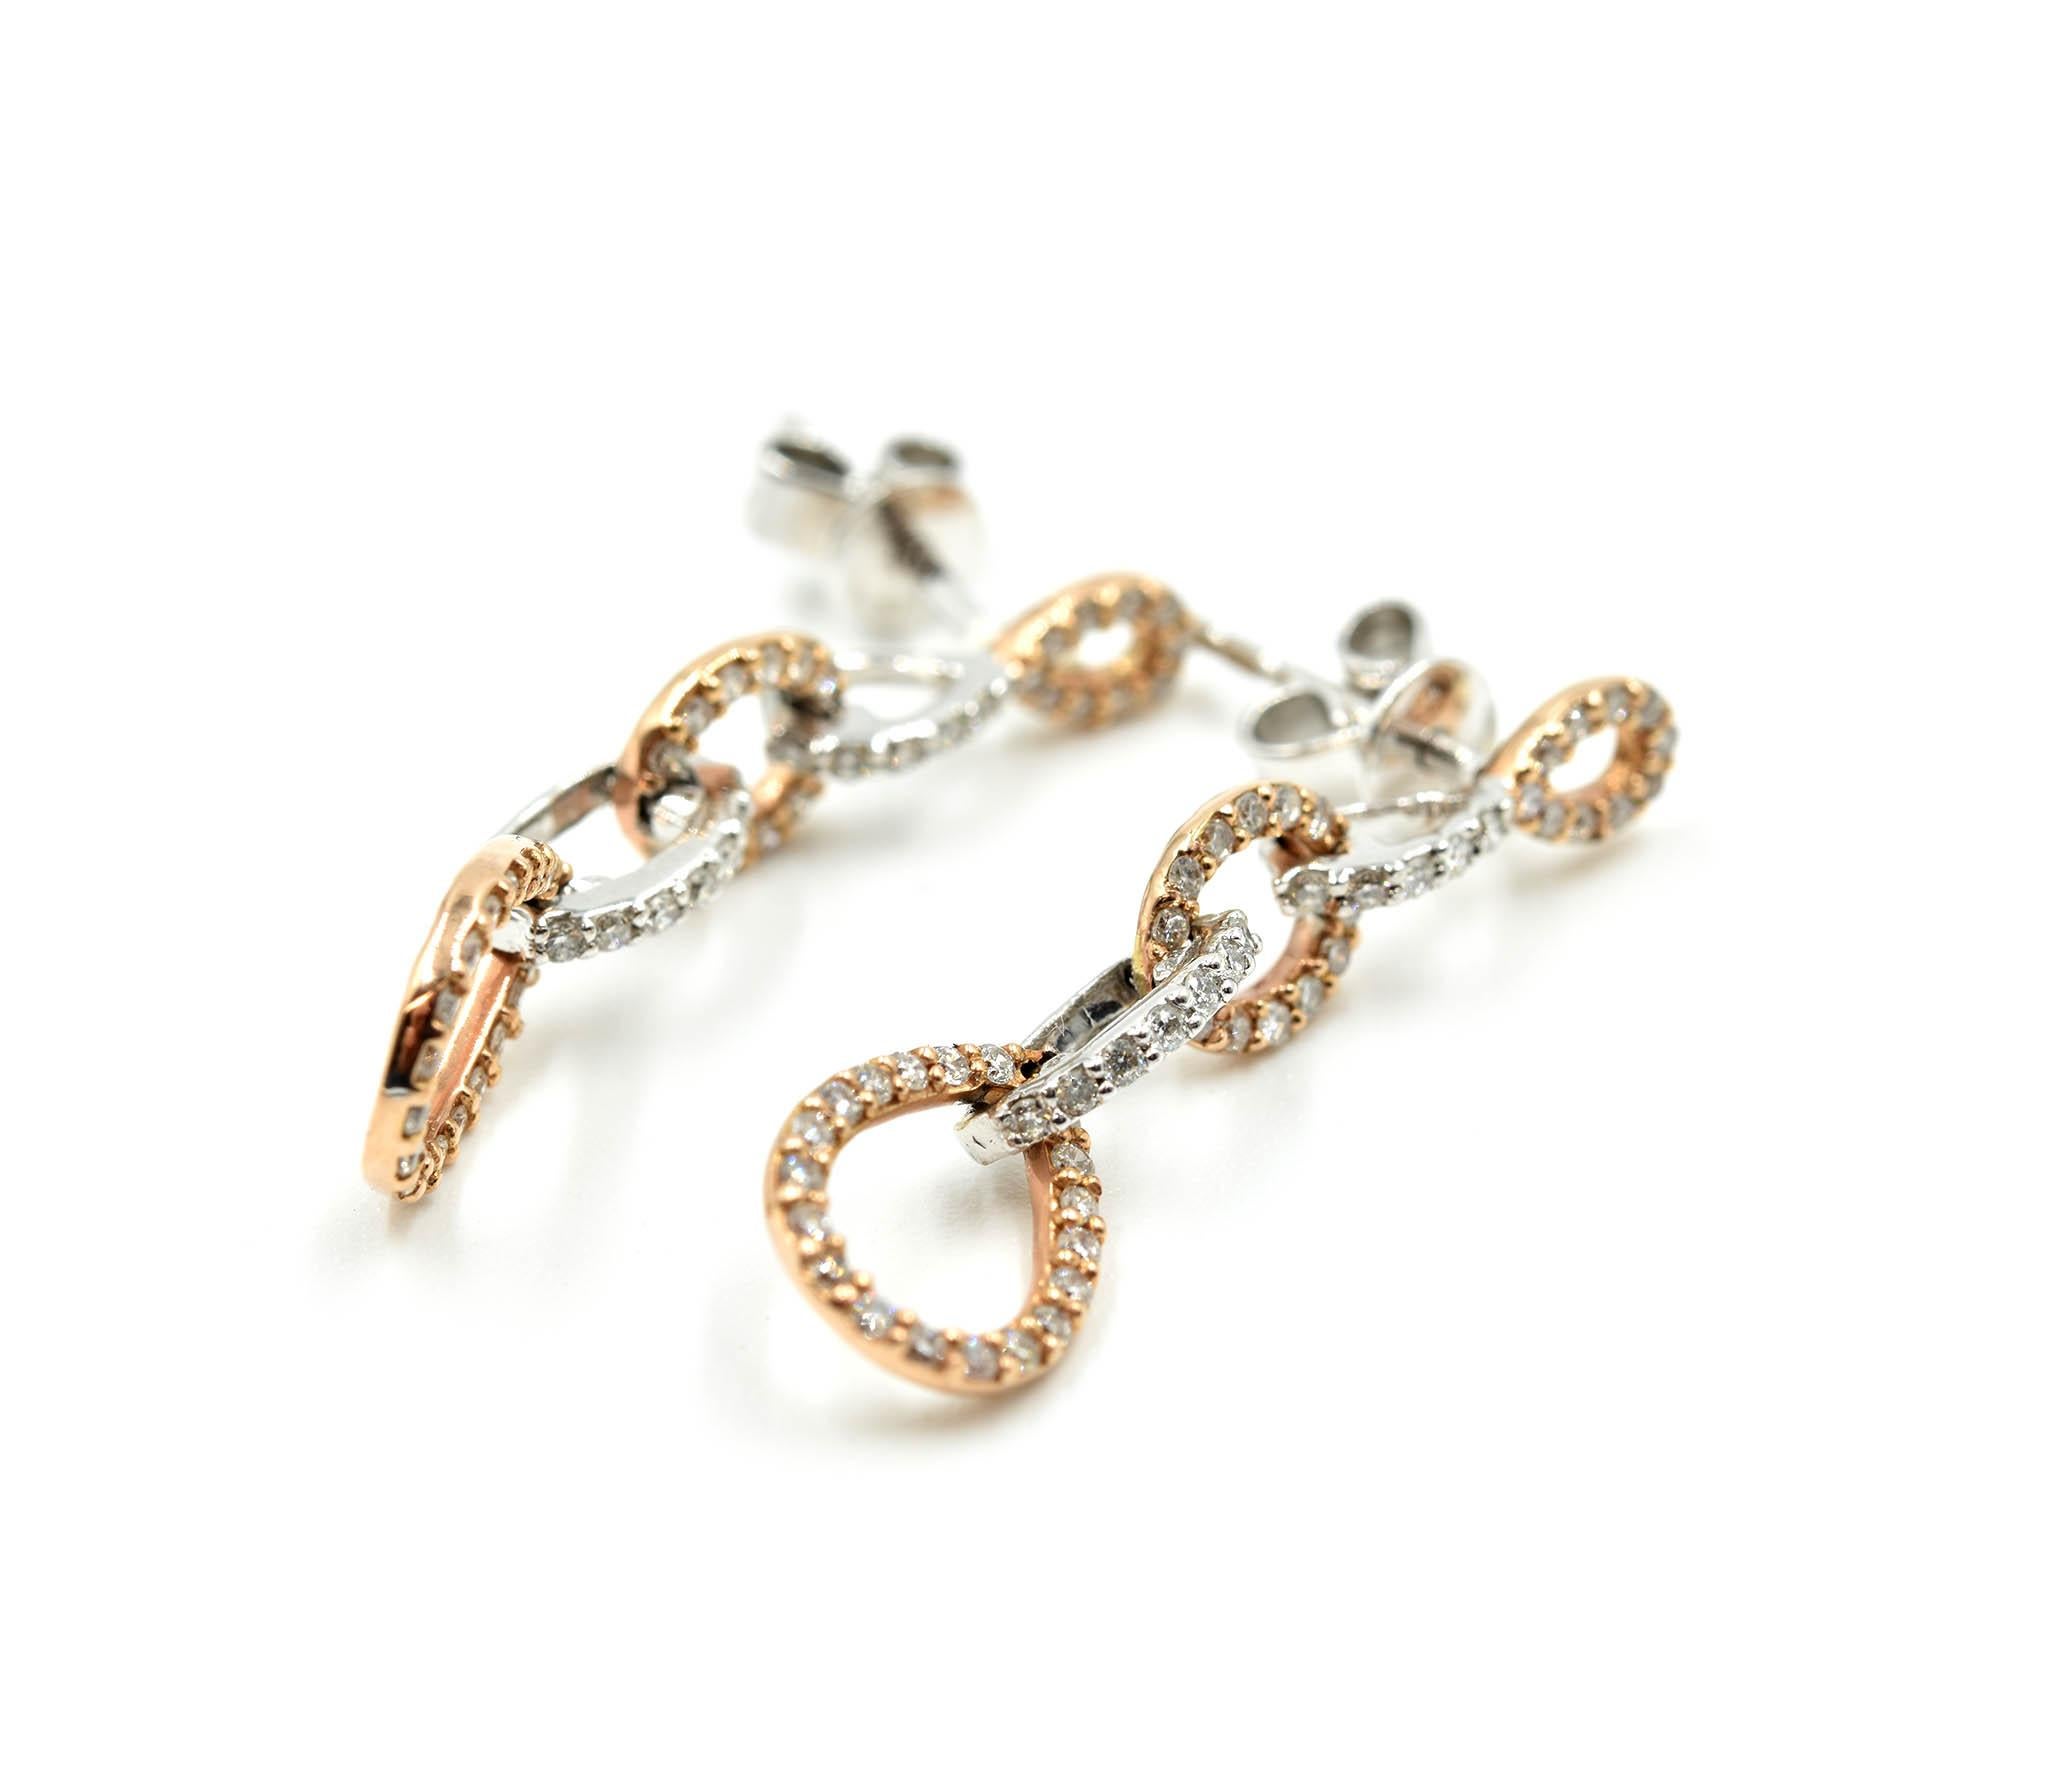 Designer: custom design
Material: 14k white and rose gold
Diamonds: 106 diamonds = 0.50 carat total weight
Dimensions: each earring is 1 1/4th inches long and 1/4th an inch long  
Fastenings: friction backs
Weight: 2.60 grams
